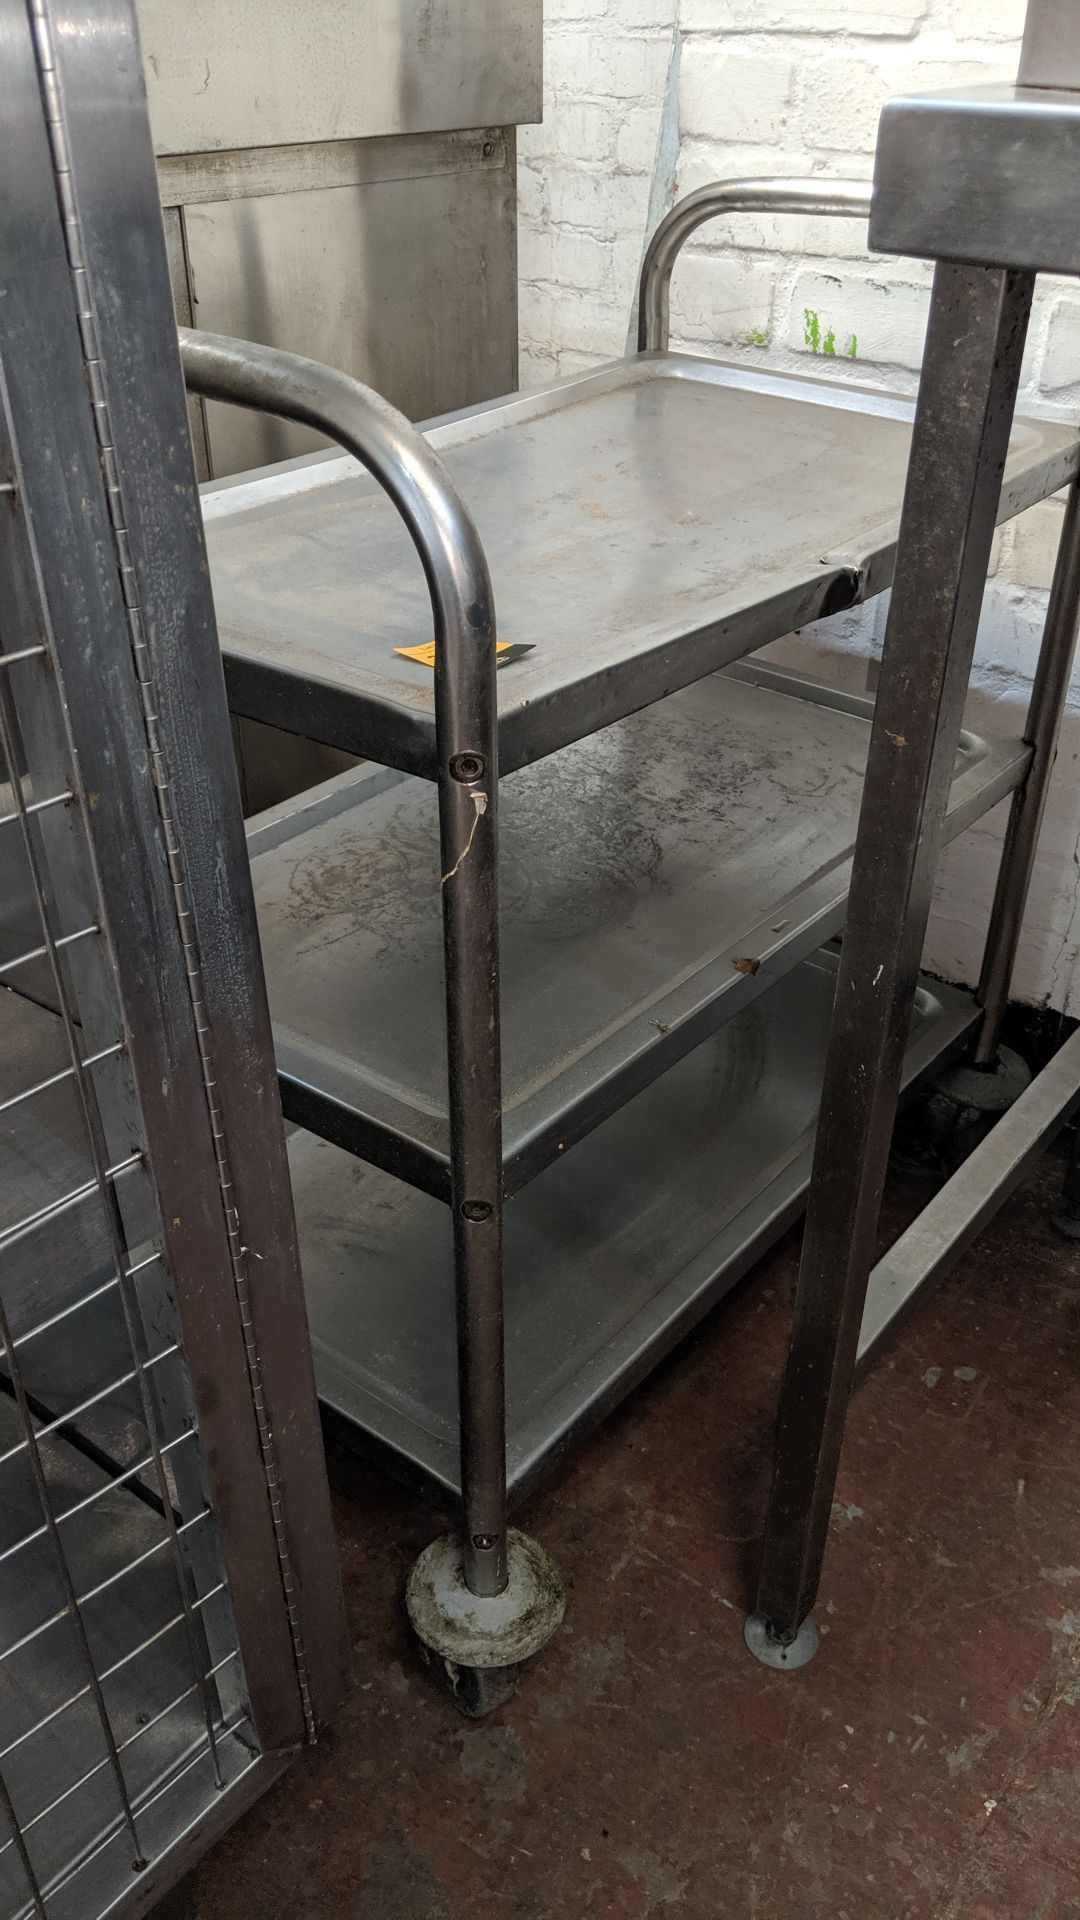 Stainless steel triple tier trolley IMPORTANT: Please remember goods successfully bid upon must be